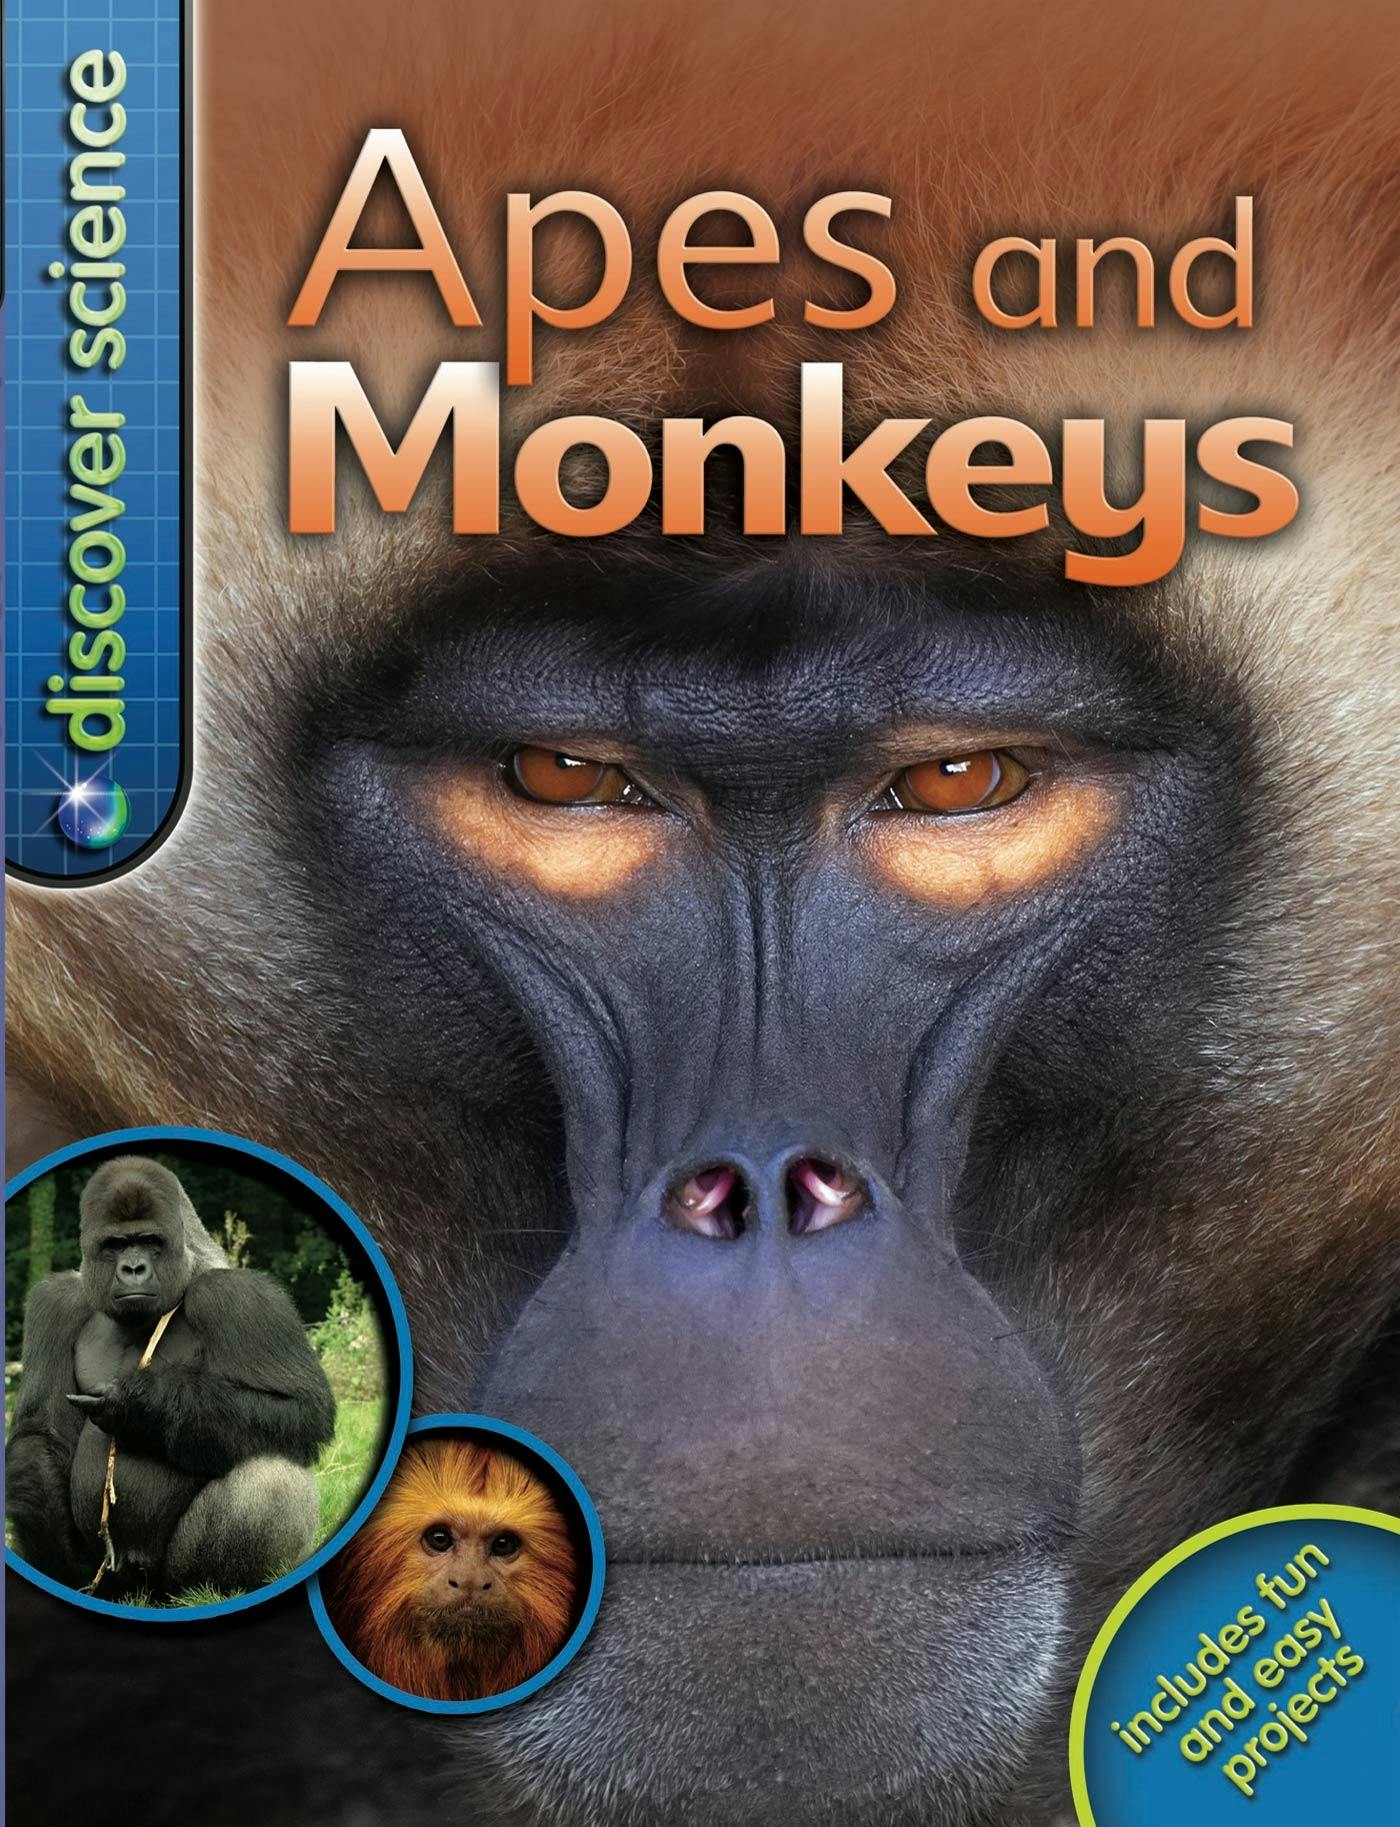 Discover Science: Apes and Monkeys